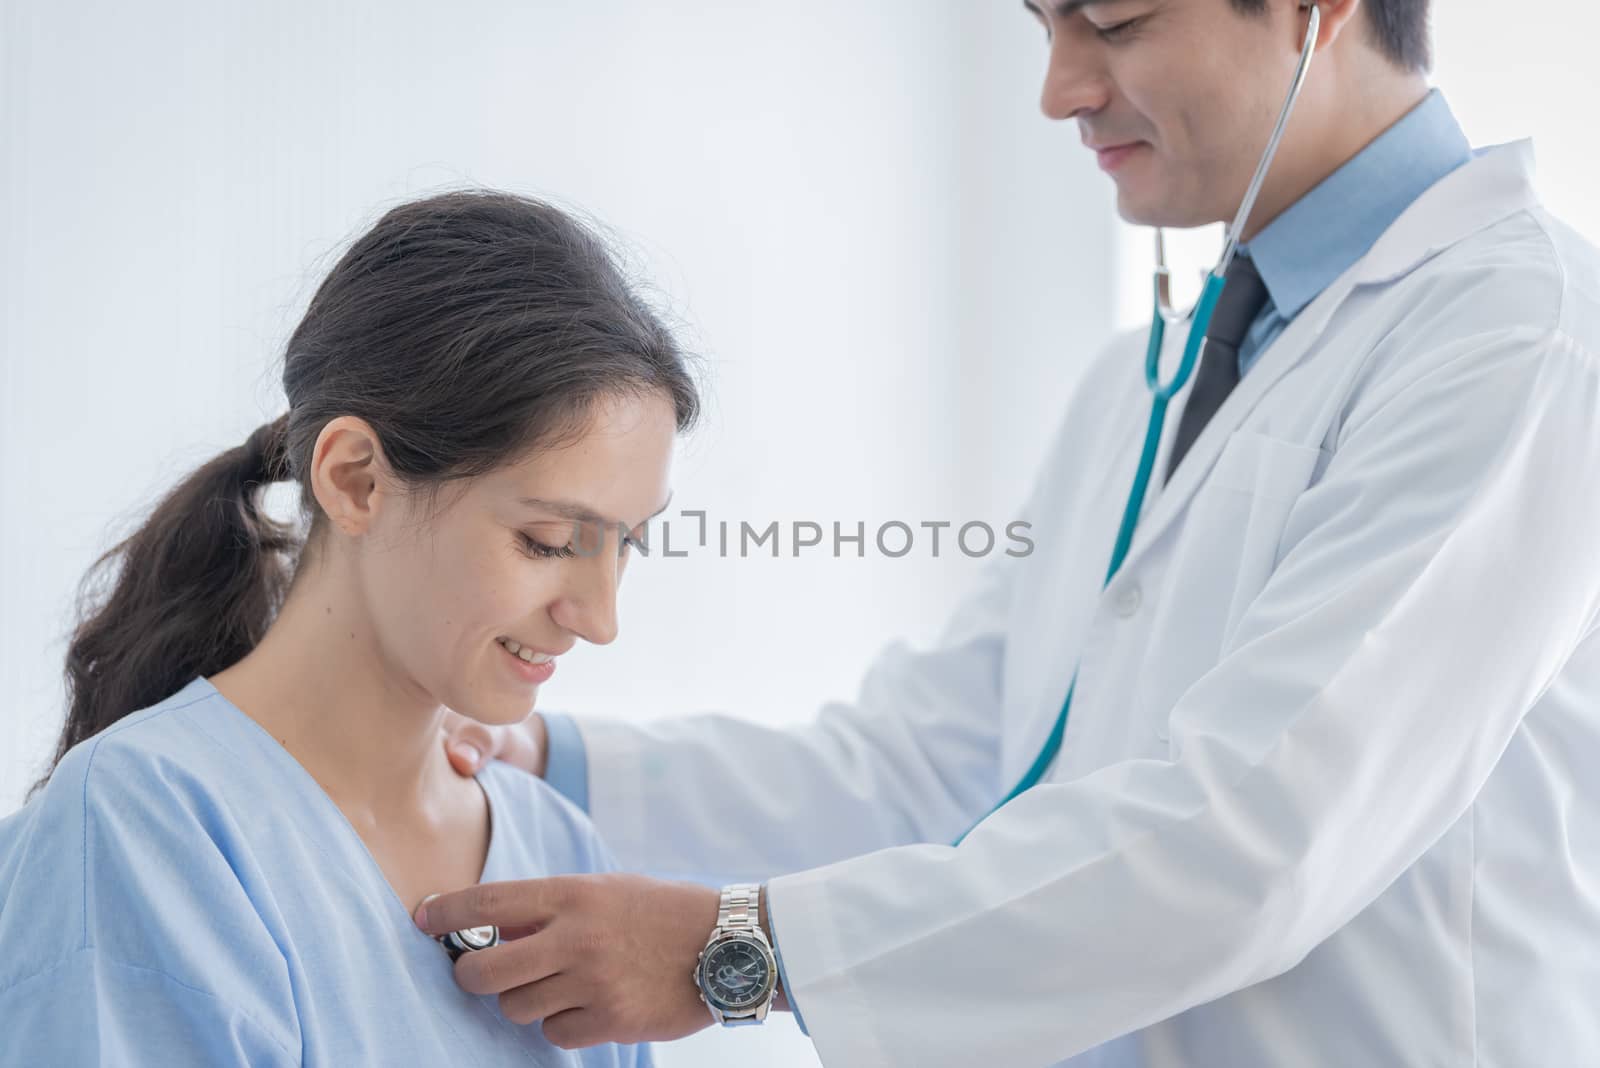 A doctor take care of sick patient woman at the hospital or medical clinic.